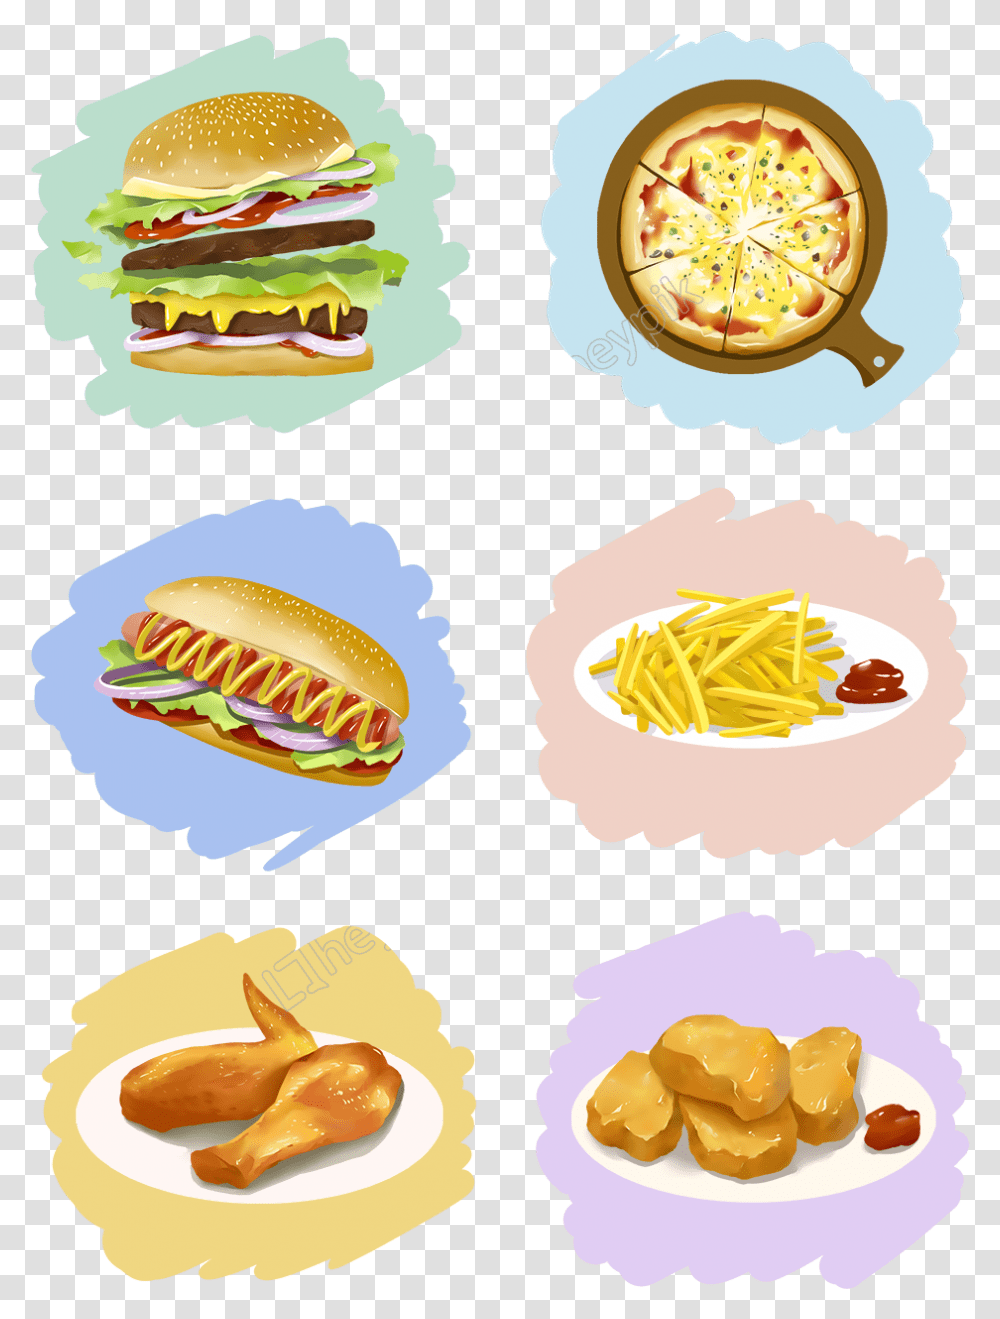 Hand Painted Original Anime Vector Food Fast Food Foreign Anime Hand Pulled Noodles, Burger, Hot Dog, Lunch, Meal Transparent Png